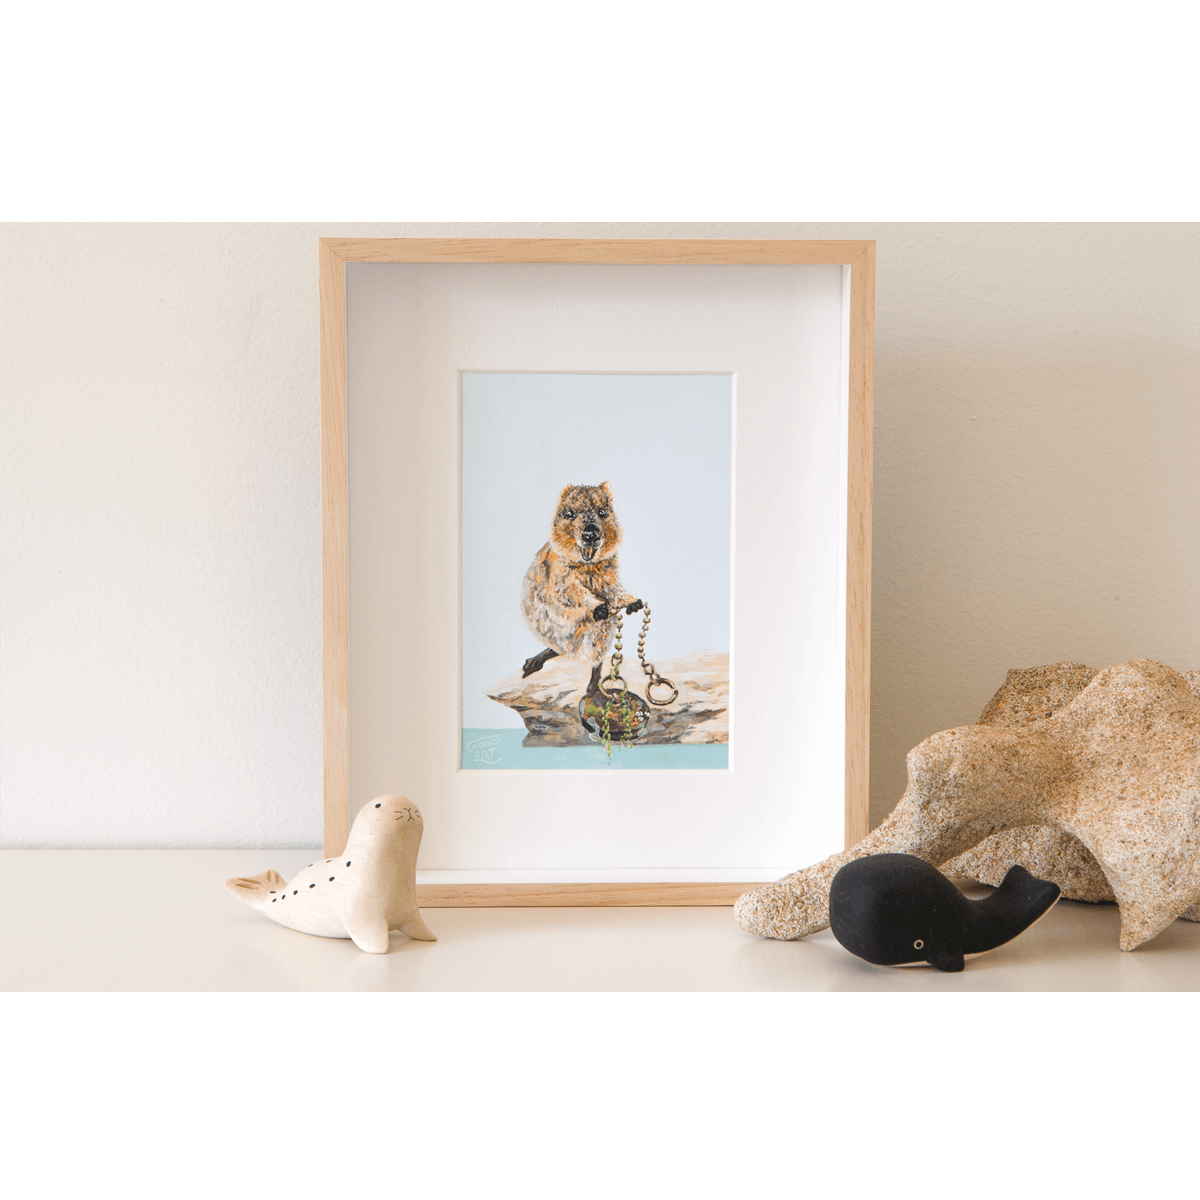 Standing on the rocks at the edge of The Basin, Rottnest Island a quokka is pulling a large sink plug from the sea. An original artwork of the quokka at The Basin is framed and sits on a shelf.